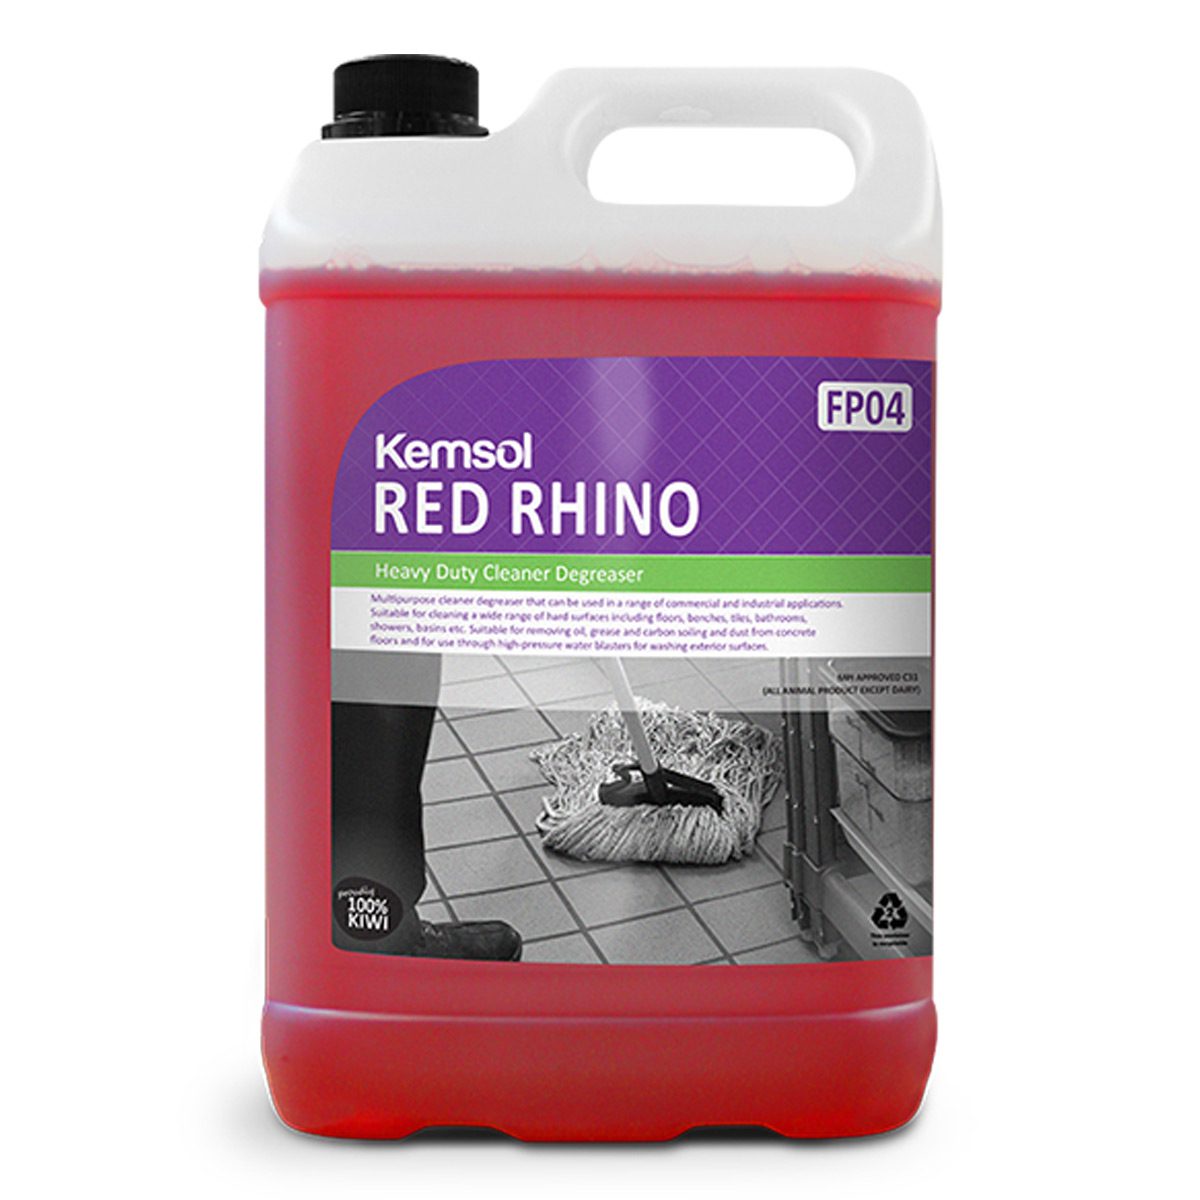 cleaning-products-kitchen-multipurpose-kemsol-red-rhino-multi-purpose-cleaner-degreaser-commercial-industrial-hard-surfaces-floors-benches-tiles-bathrooms-showers-basins-vjs-distributors-KRHINO